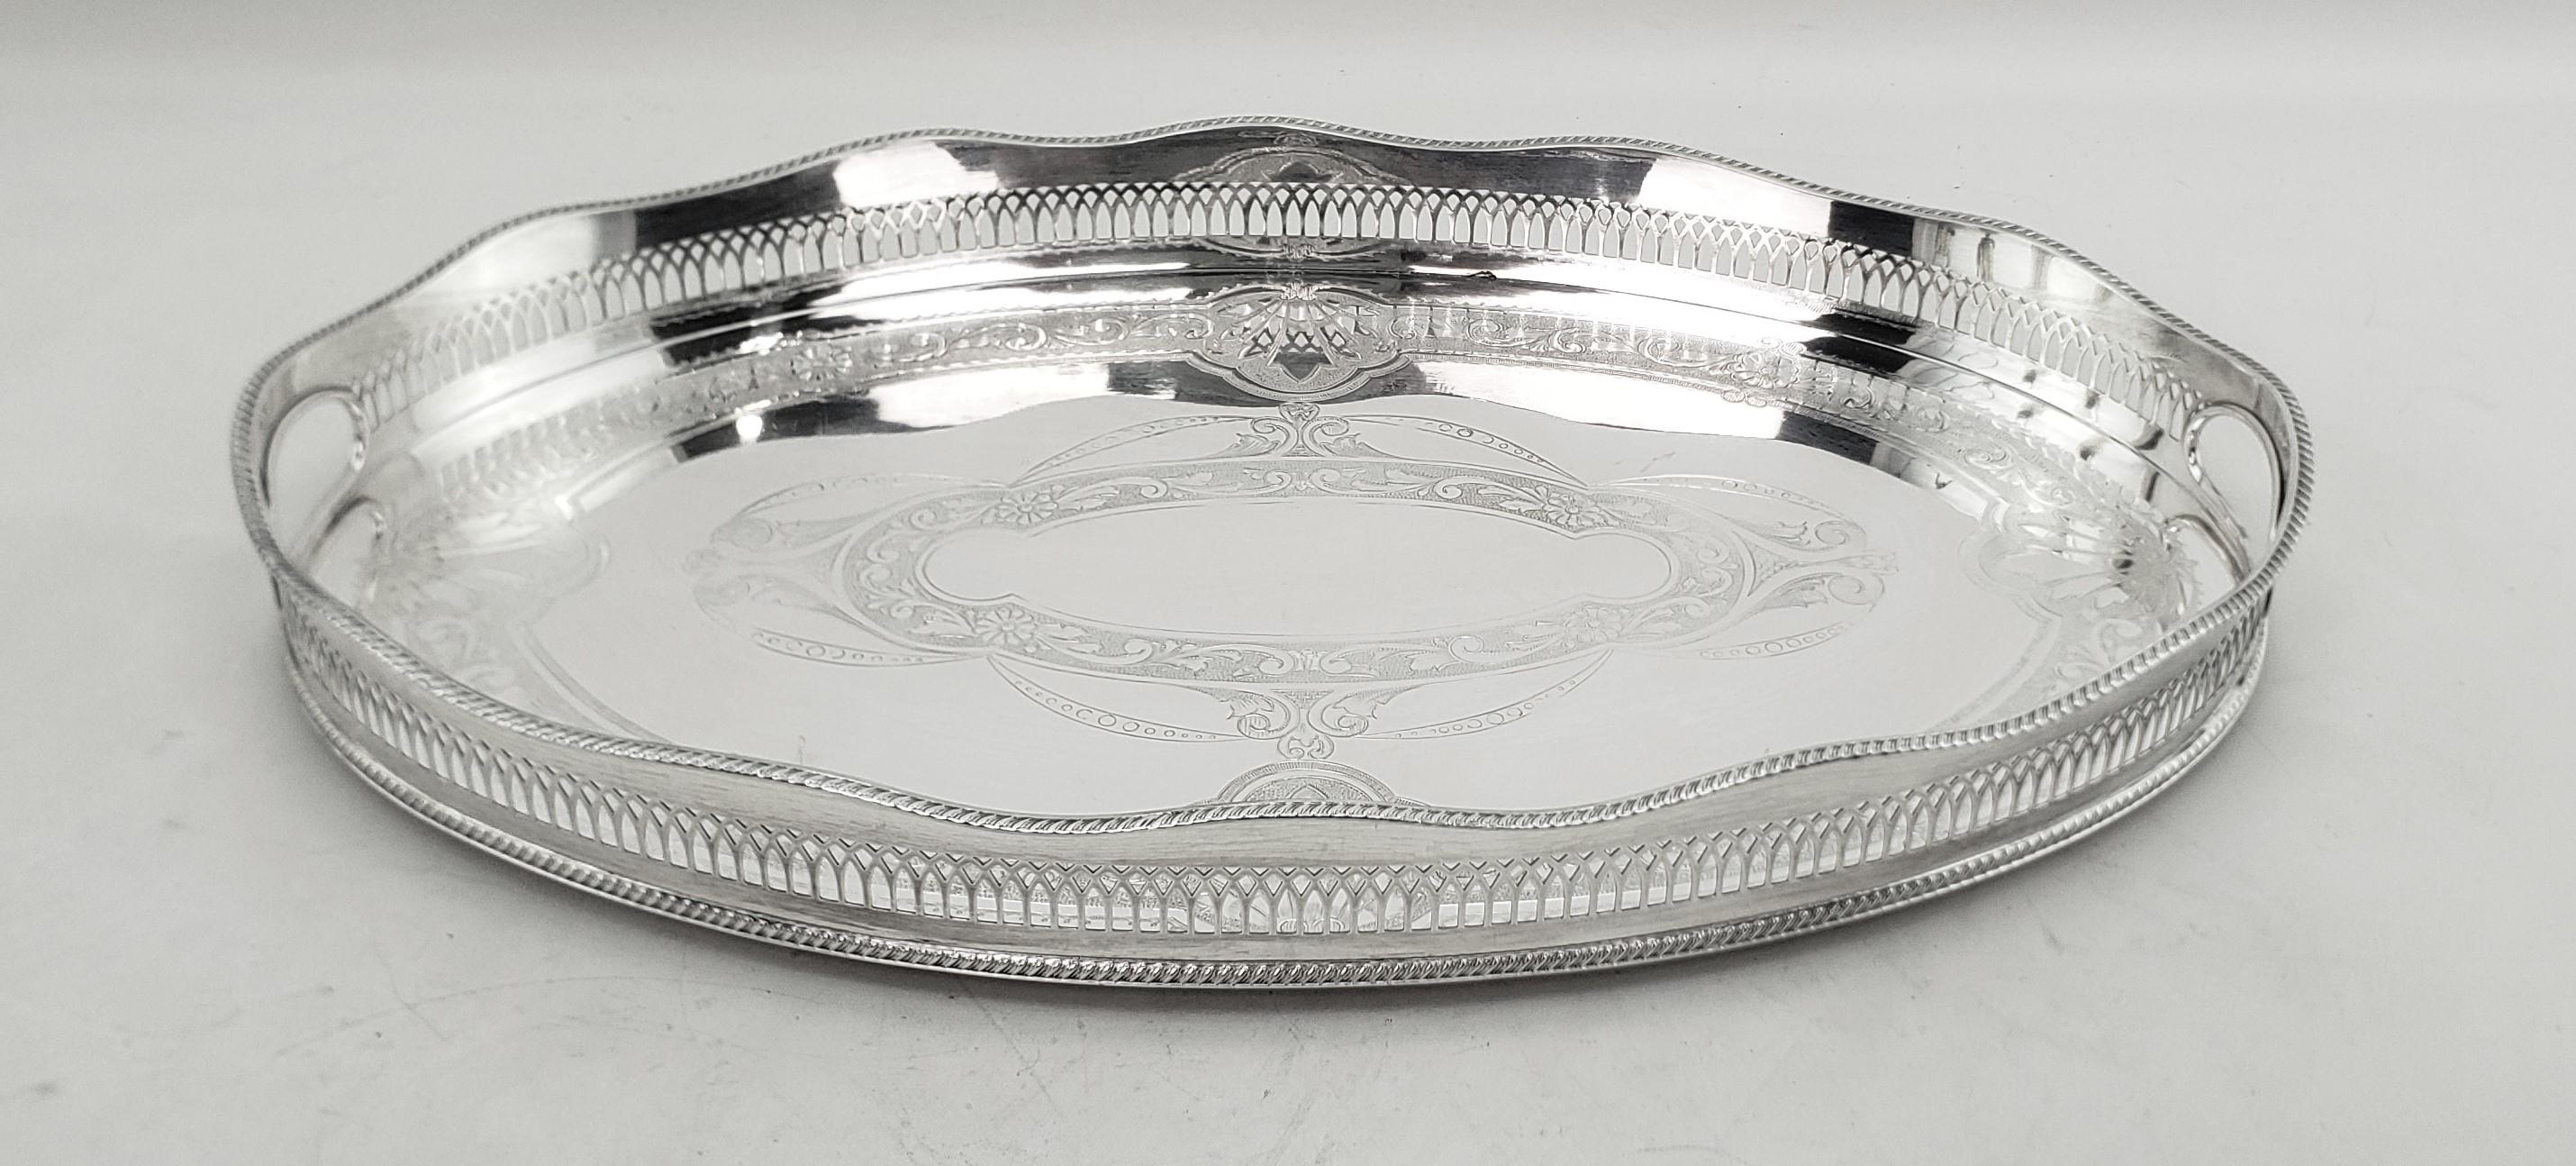 Edwardian Antique Stylied English Oval Silver Plated Gallery Serving Tray